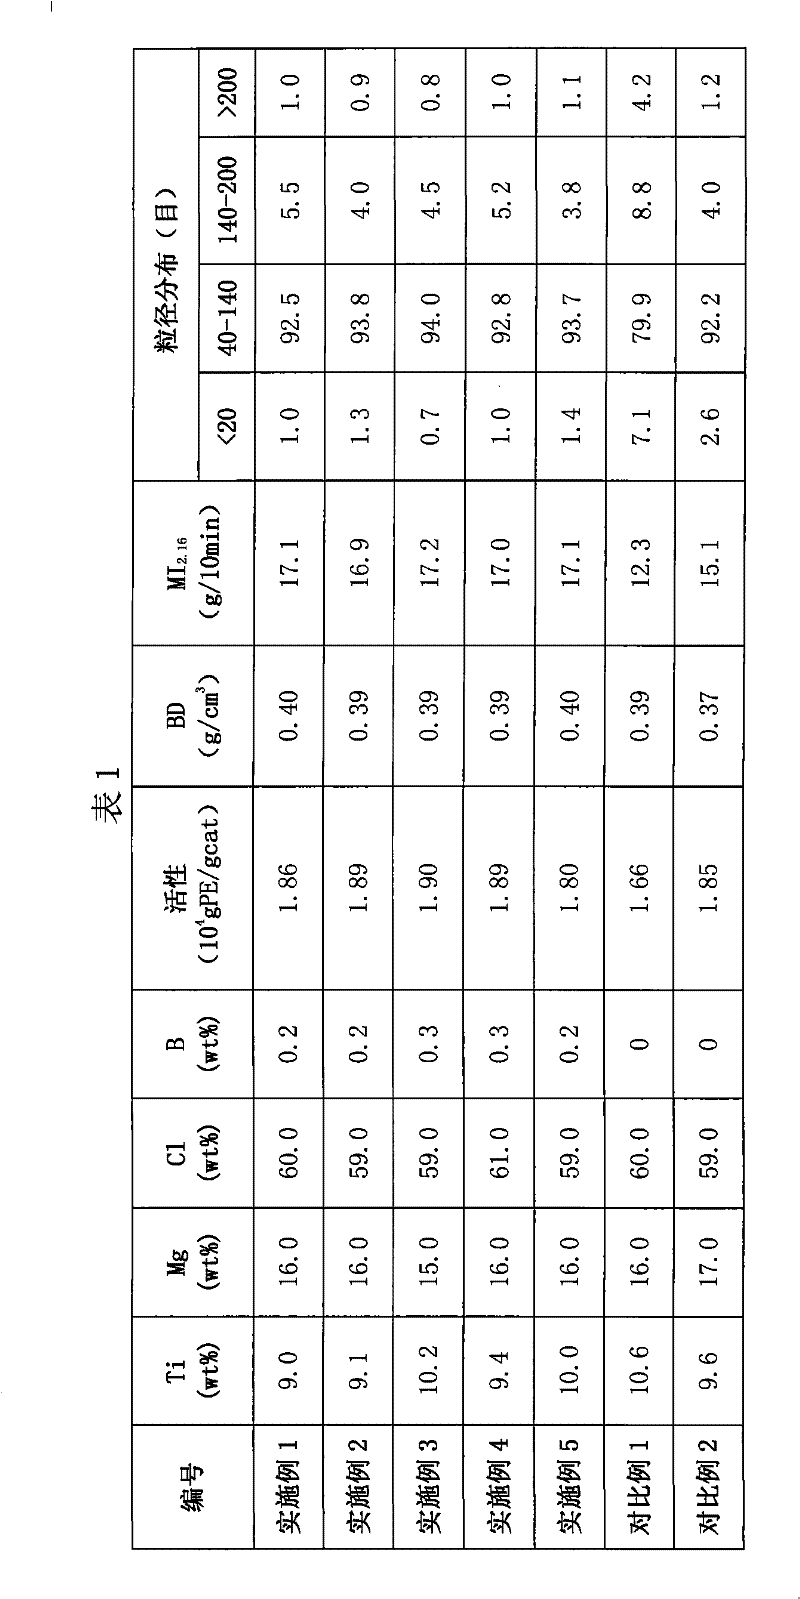 Catalyst component for vinyl polymerization and catalyst comprising the same